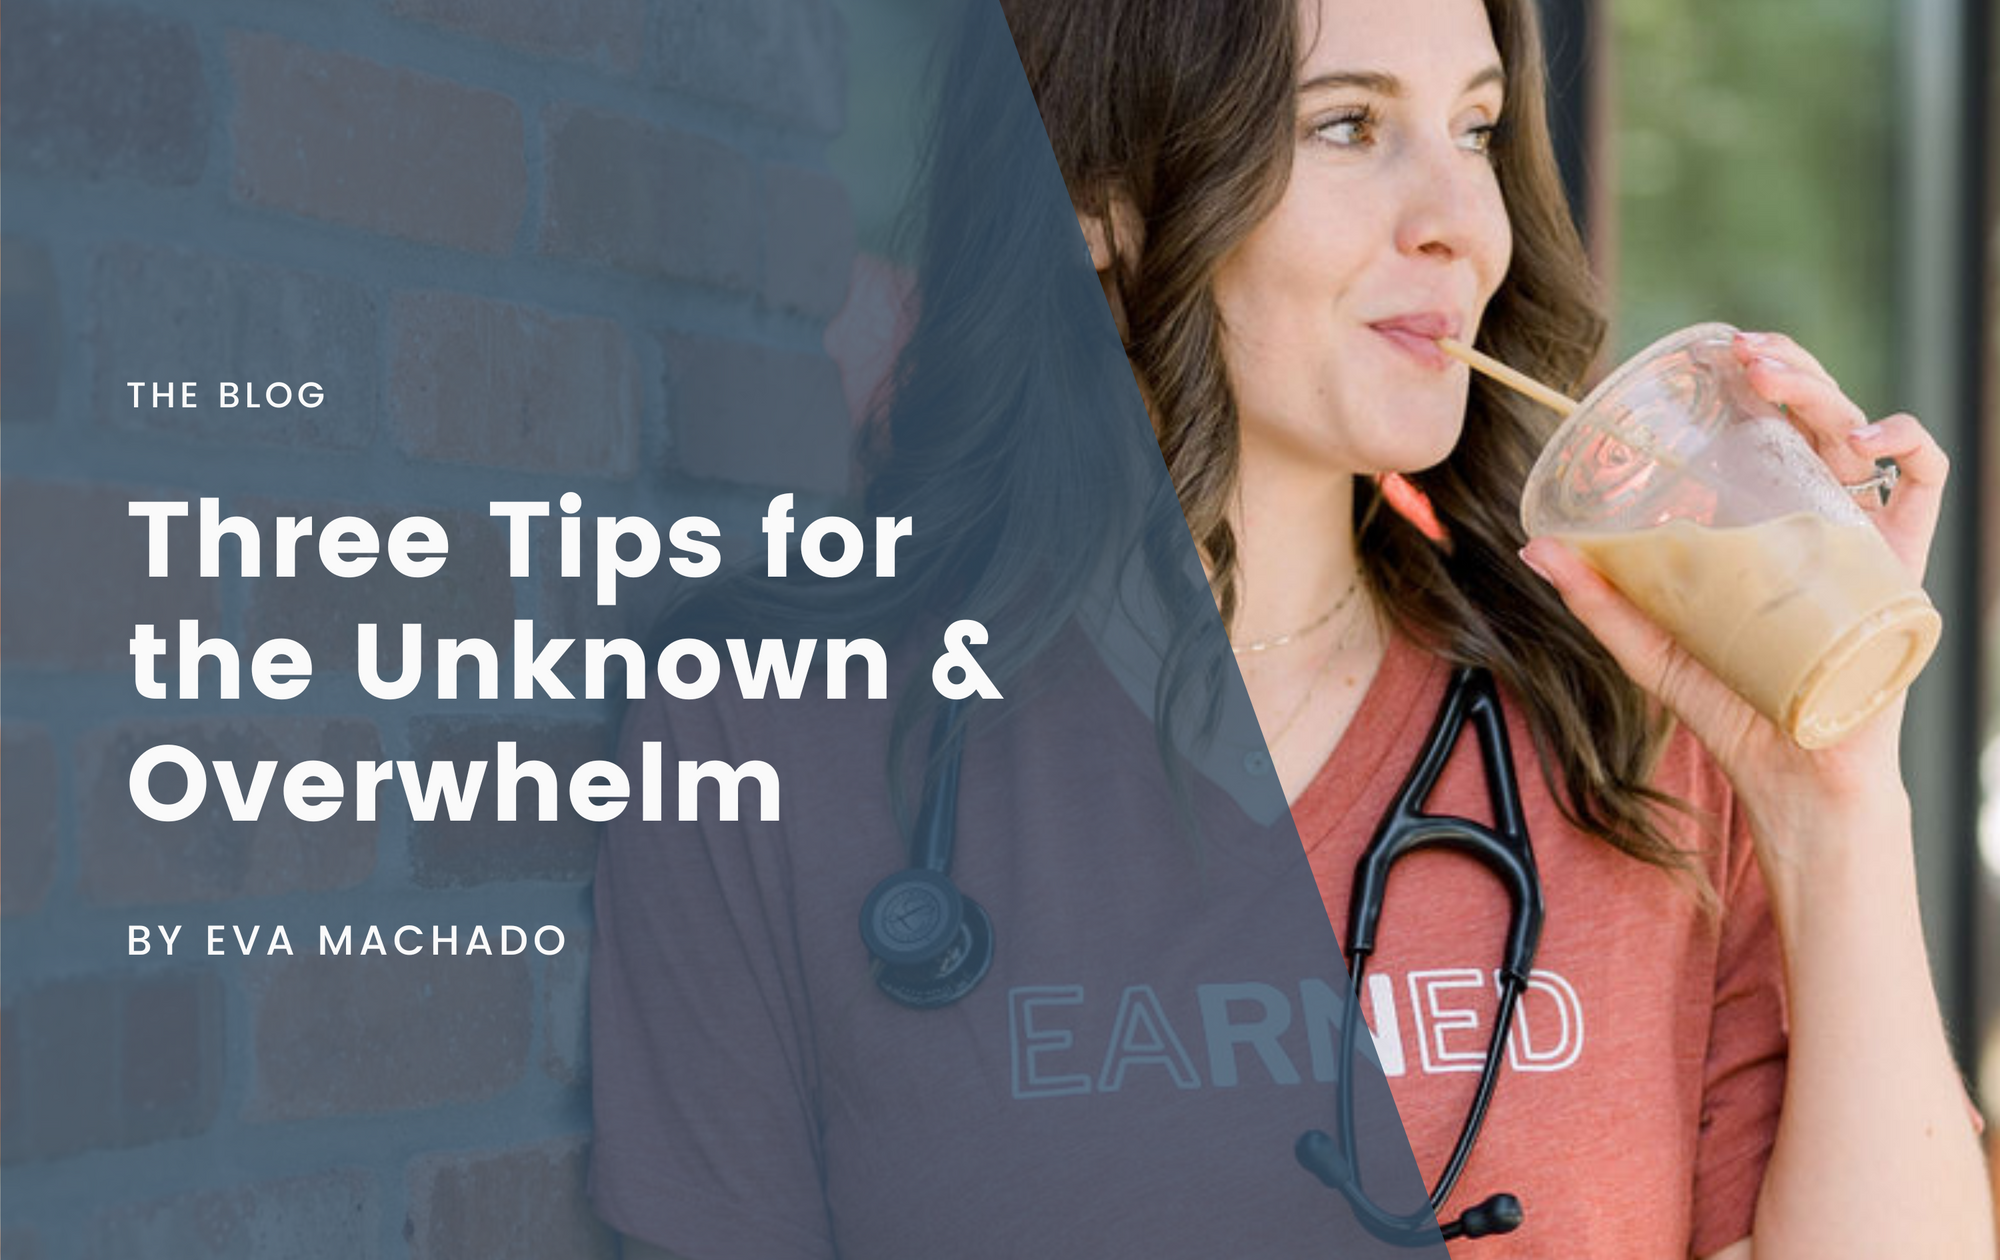 Three Tips for the Unknown & Overwhelm